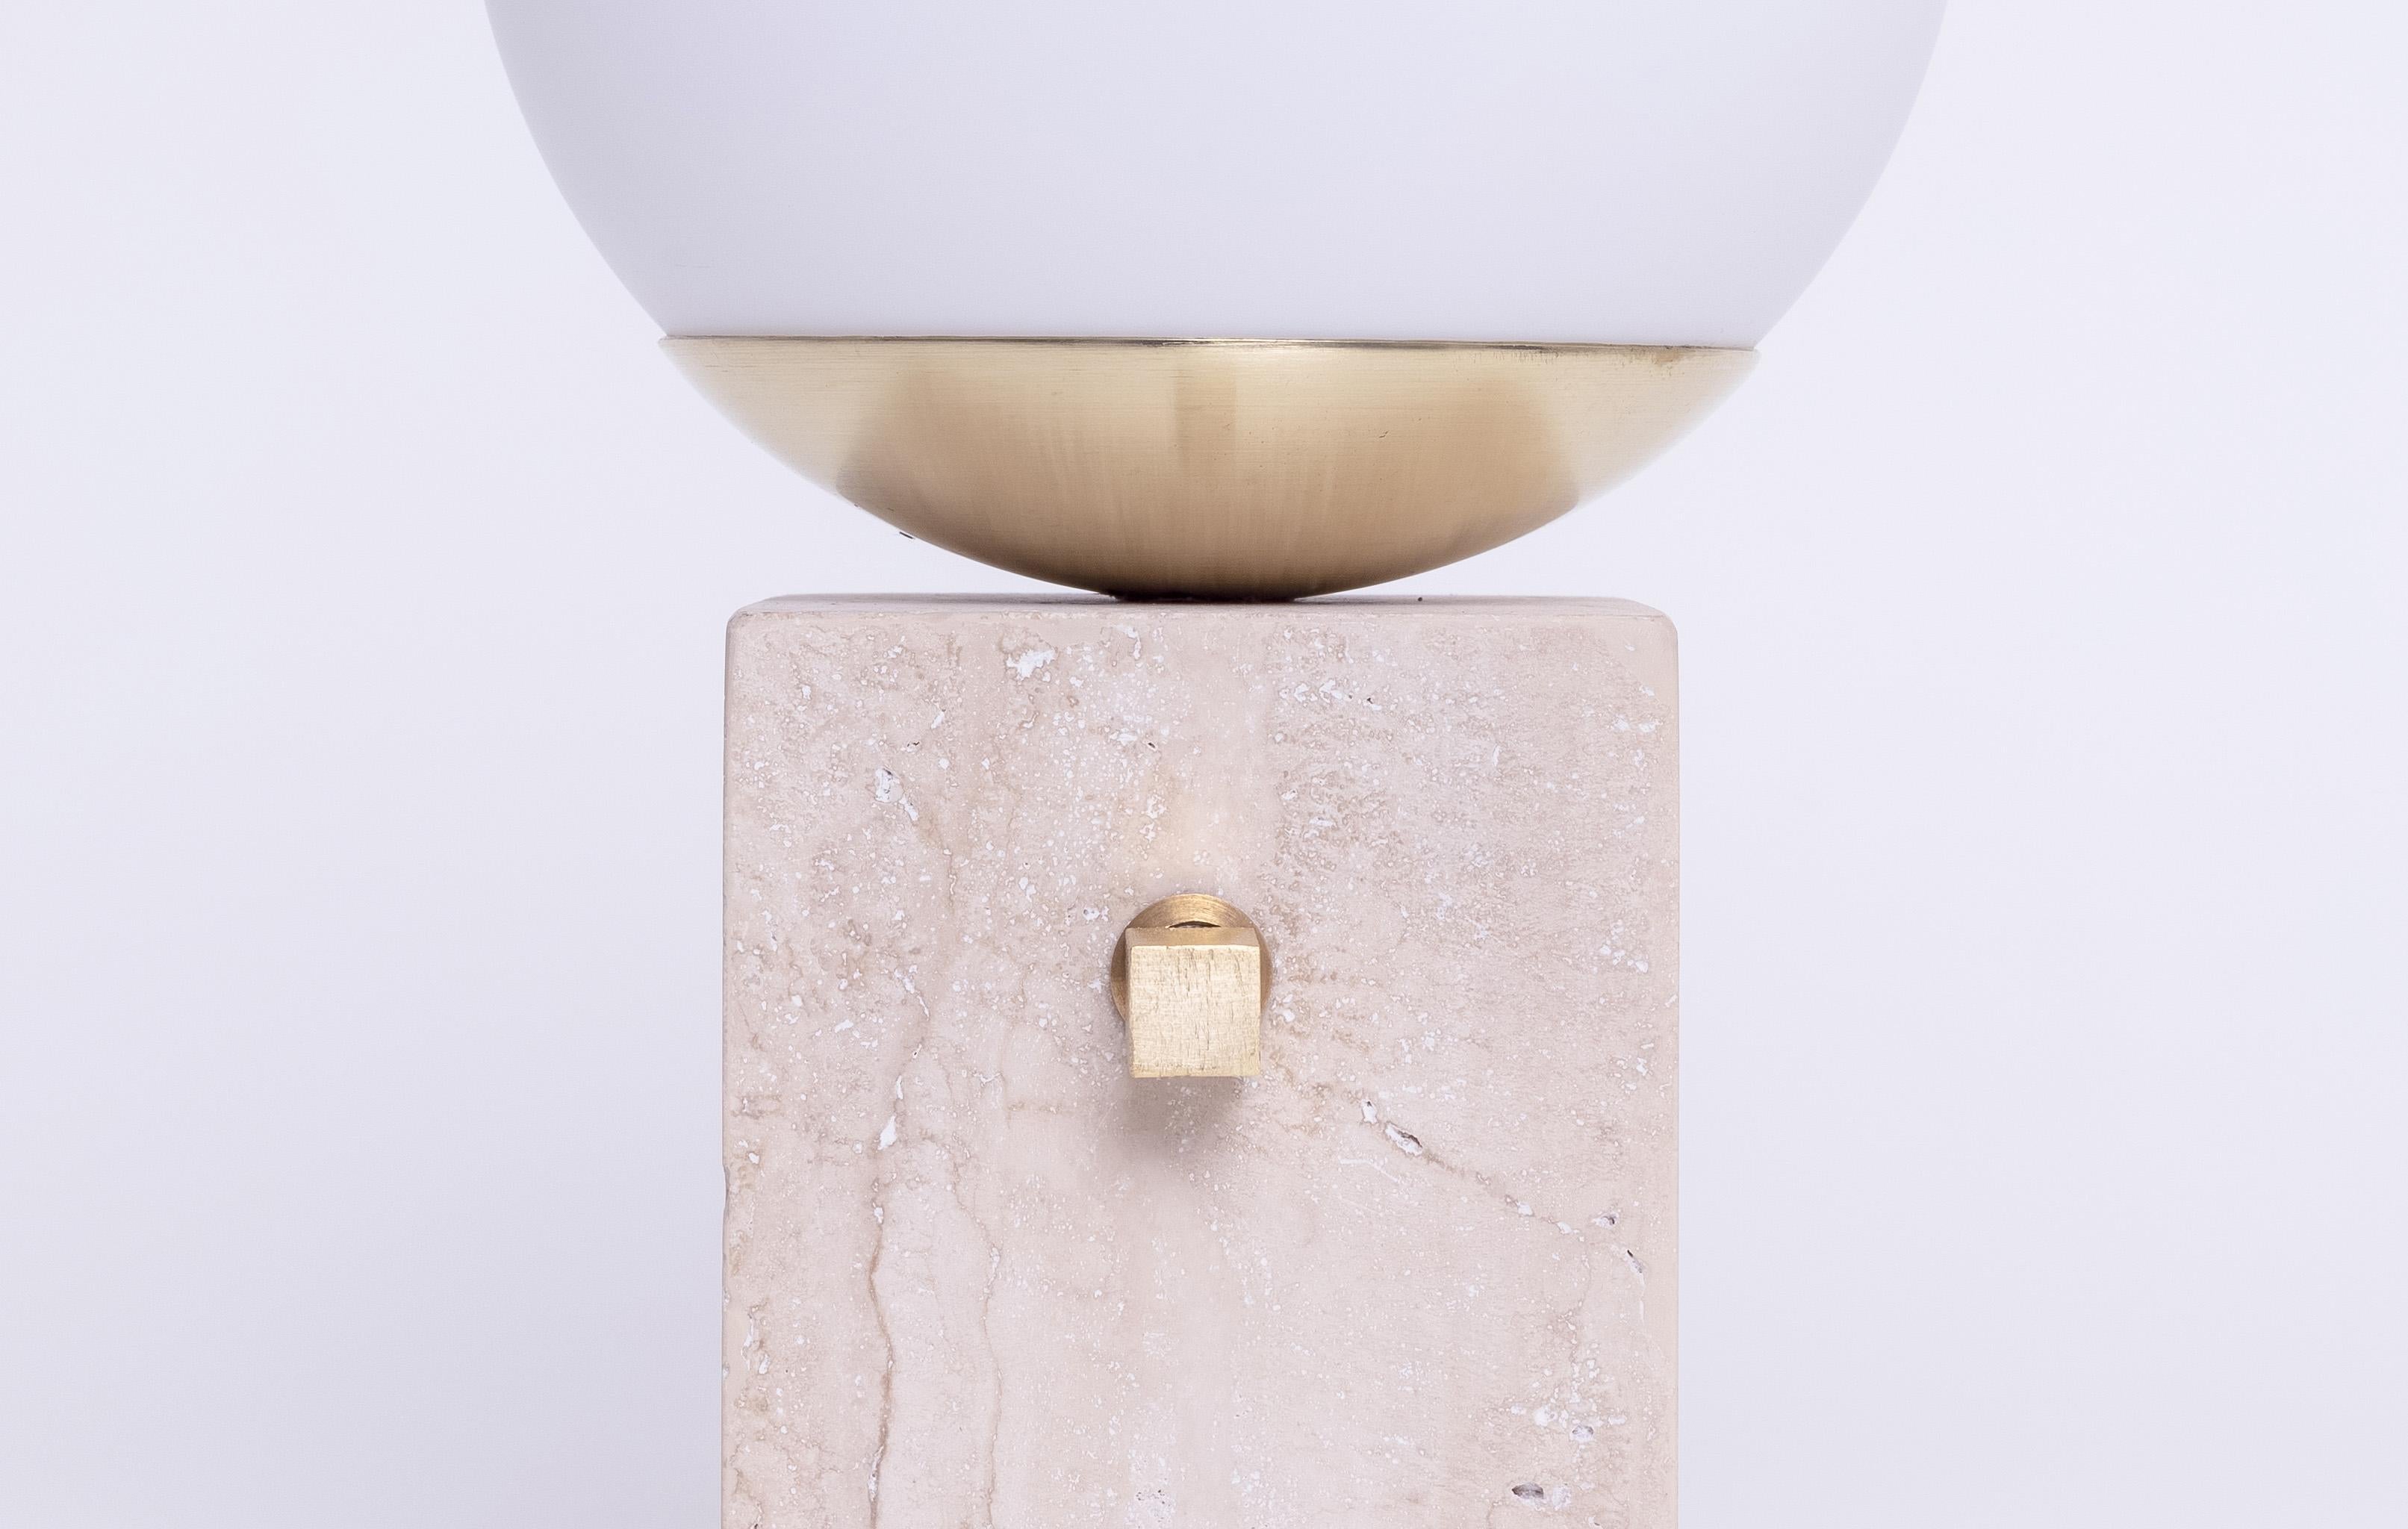 Raw marble Globe table lamps with brass retro rotary switch on the lamp. - A variety of other granites and marbles are also available upon request.

Petit Bonhomme, or 